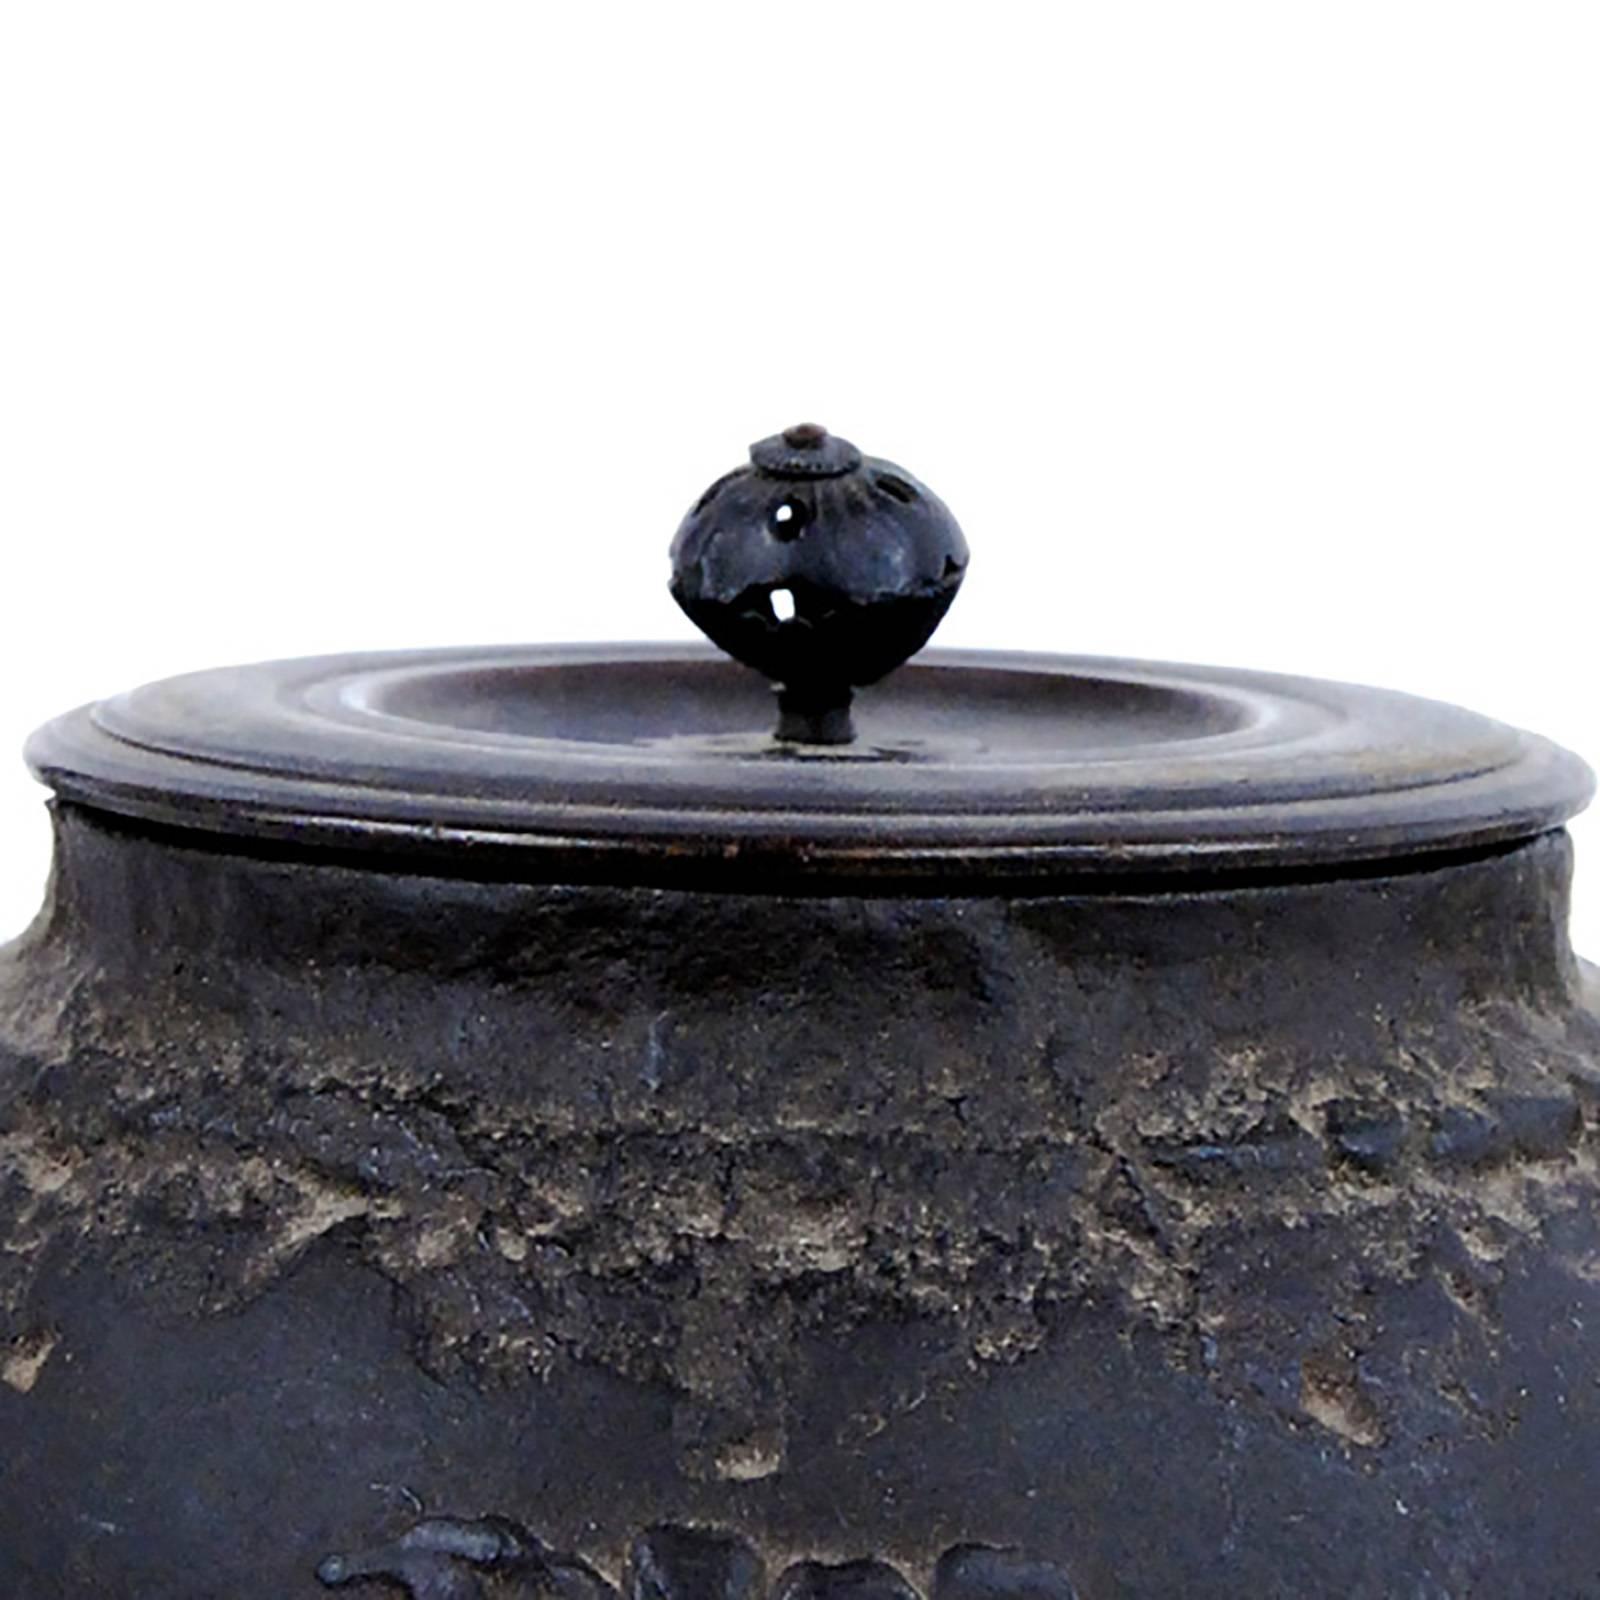 Decorated with flowering blossoms and fruit of the peach tree, this Japanese teapot was used to boil water for traditional tea ceremonies. Known as tetsubin, the kettle’s cast-iron construction is said to change the quality of the water, making tea